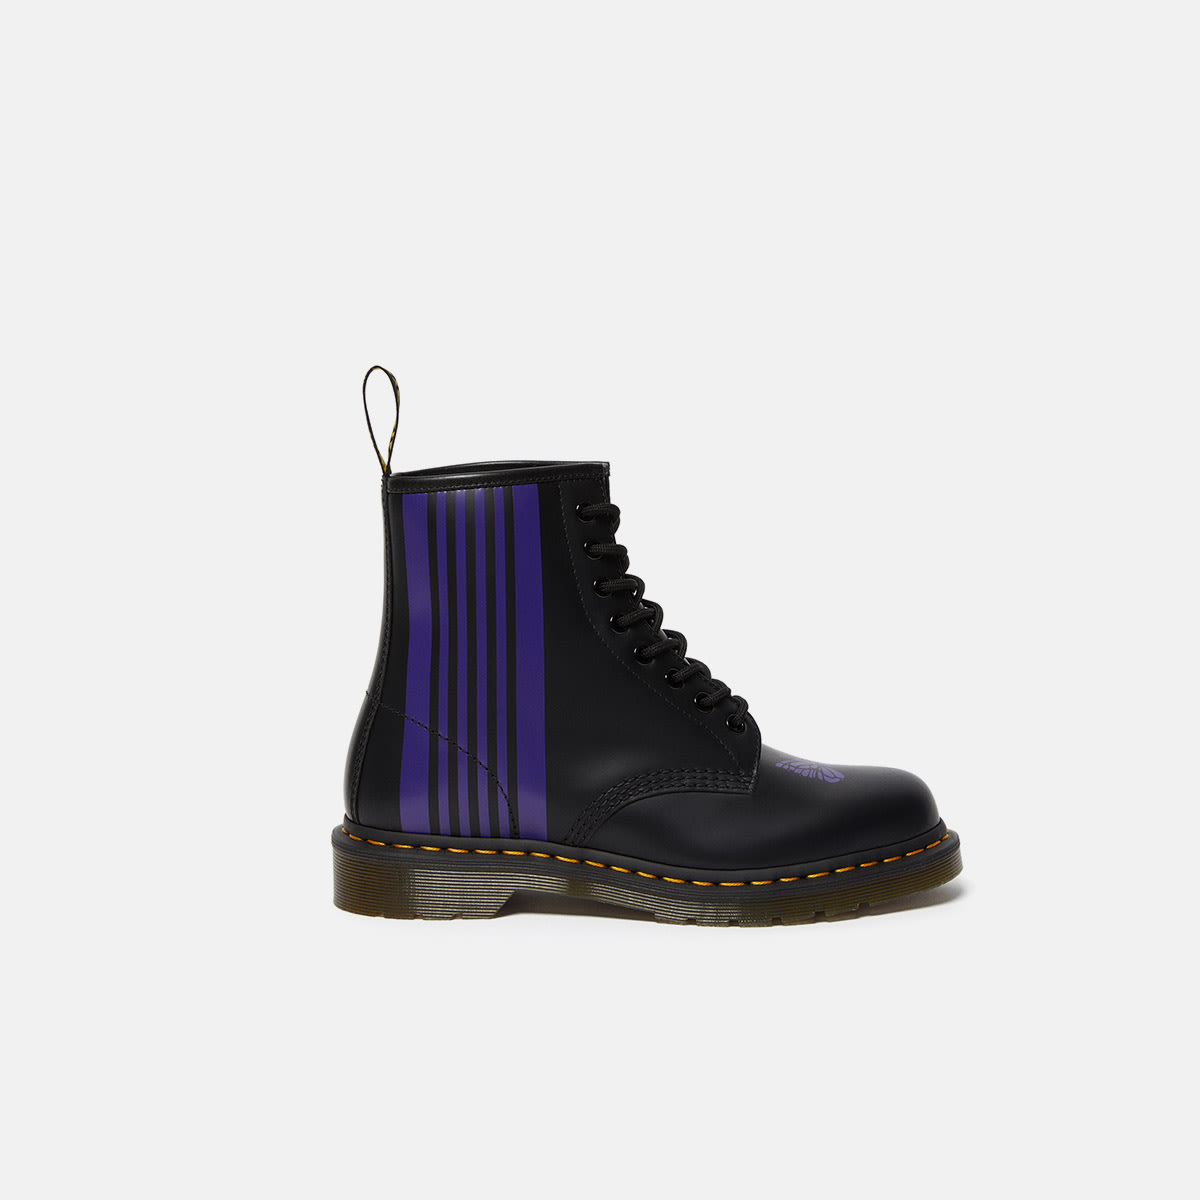 Dr. Martens x Needles 1460 Remastered 